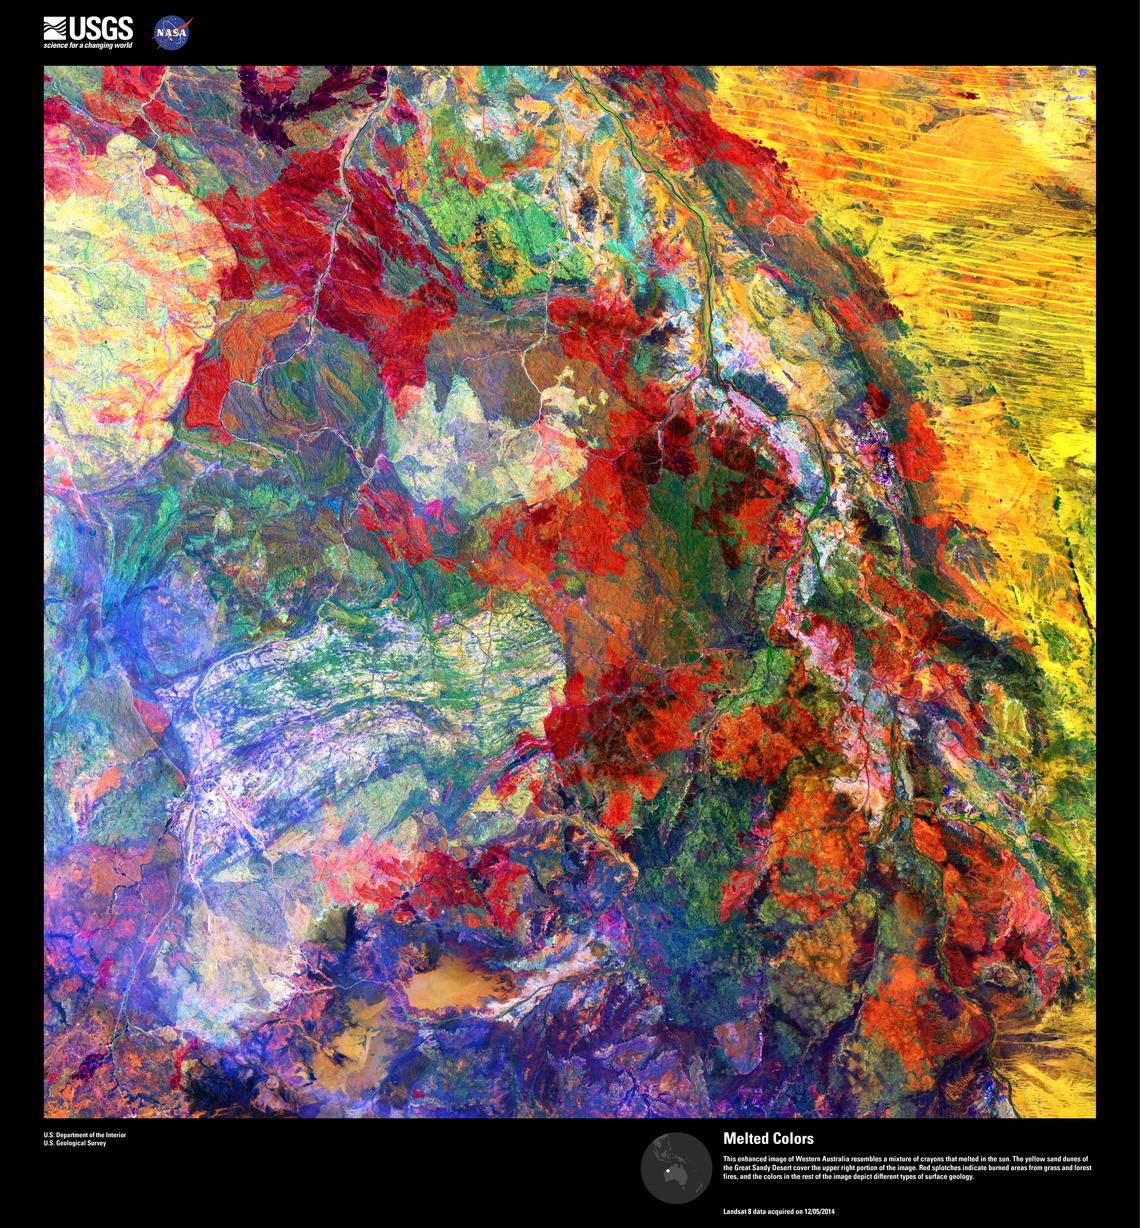 earth-as-art-melted-colors.jpg